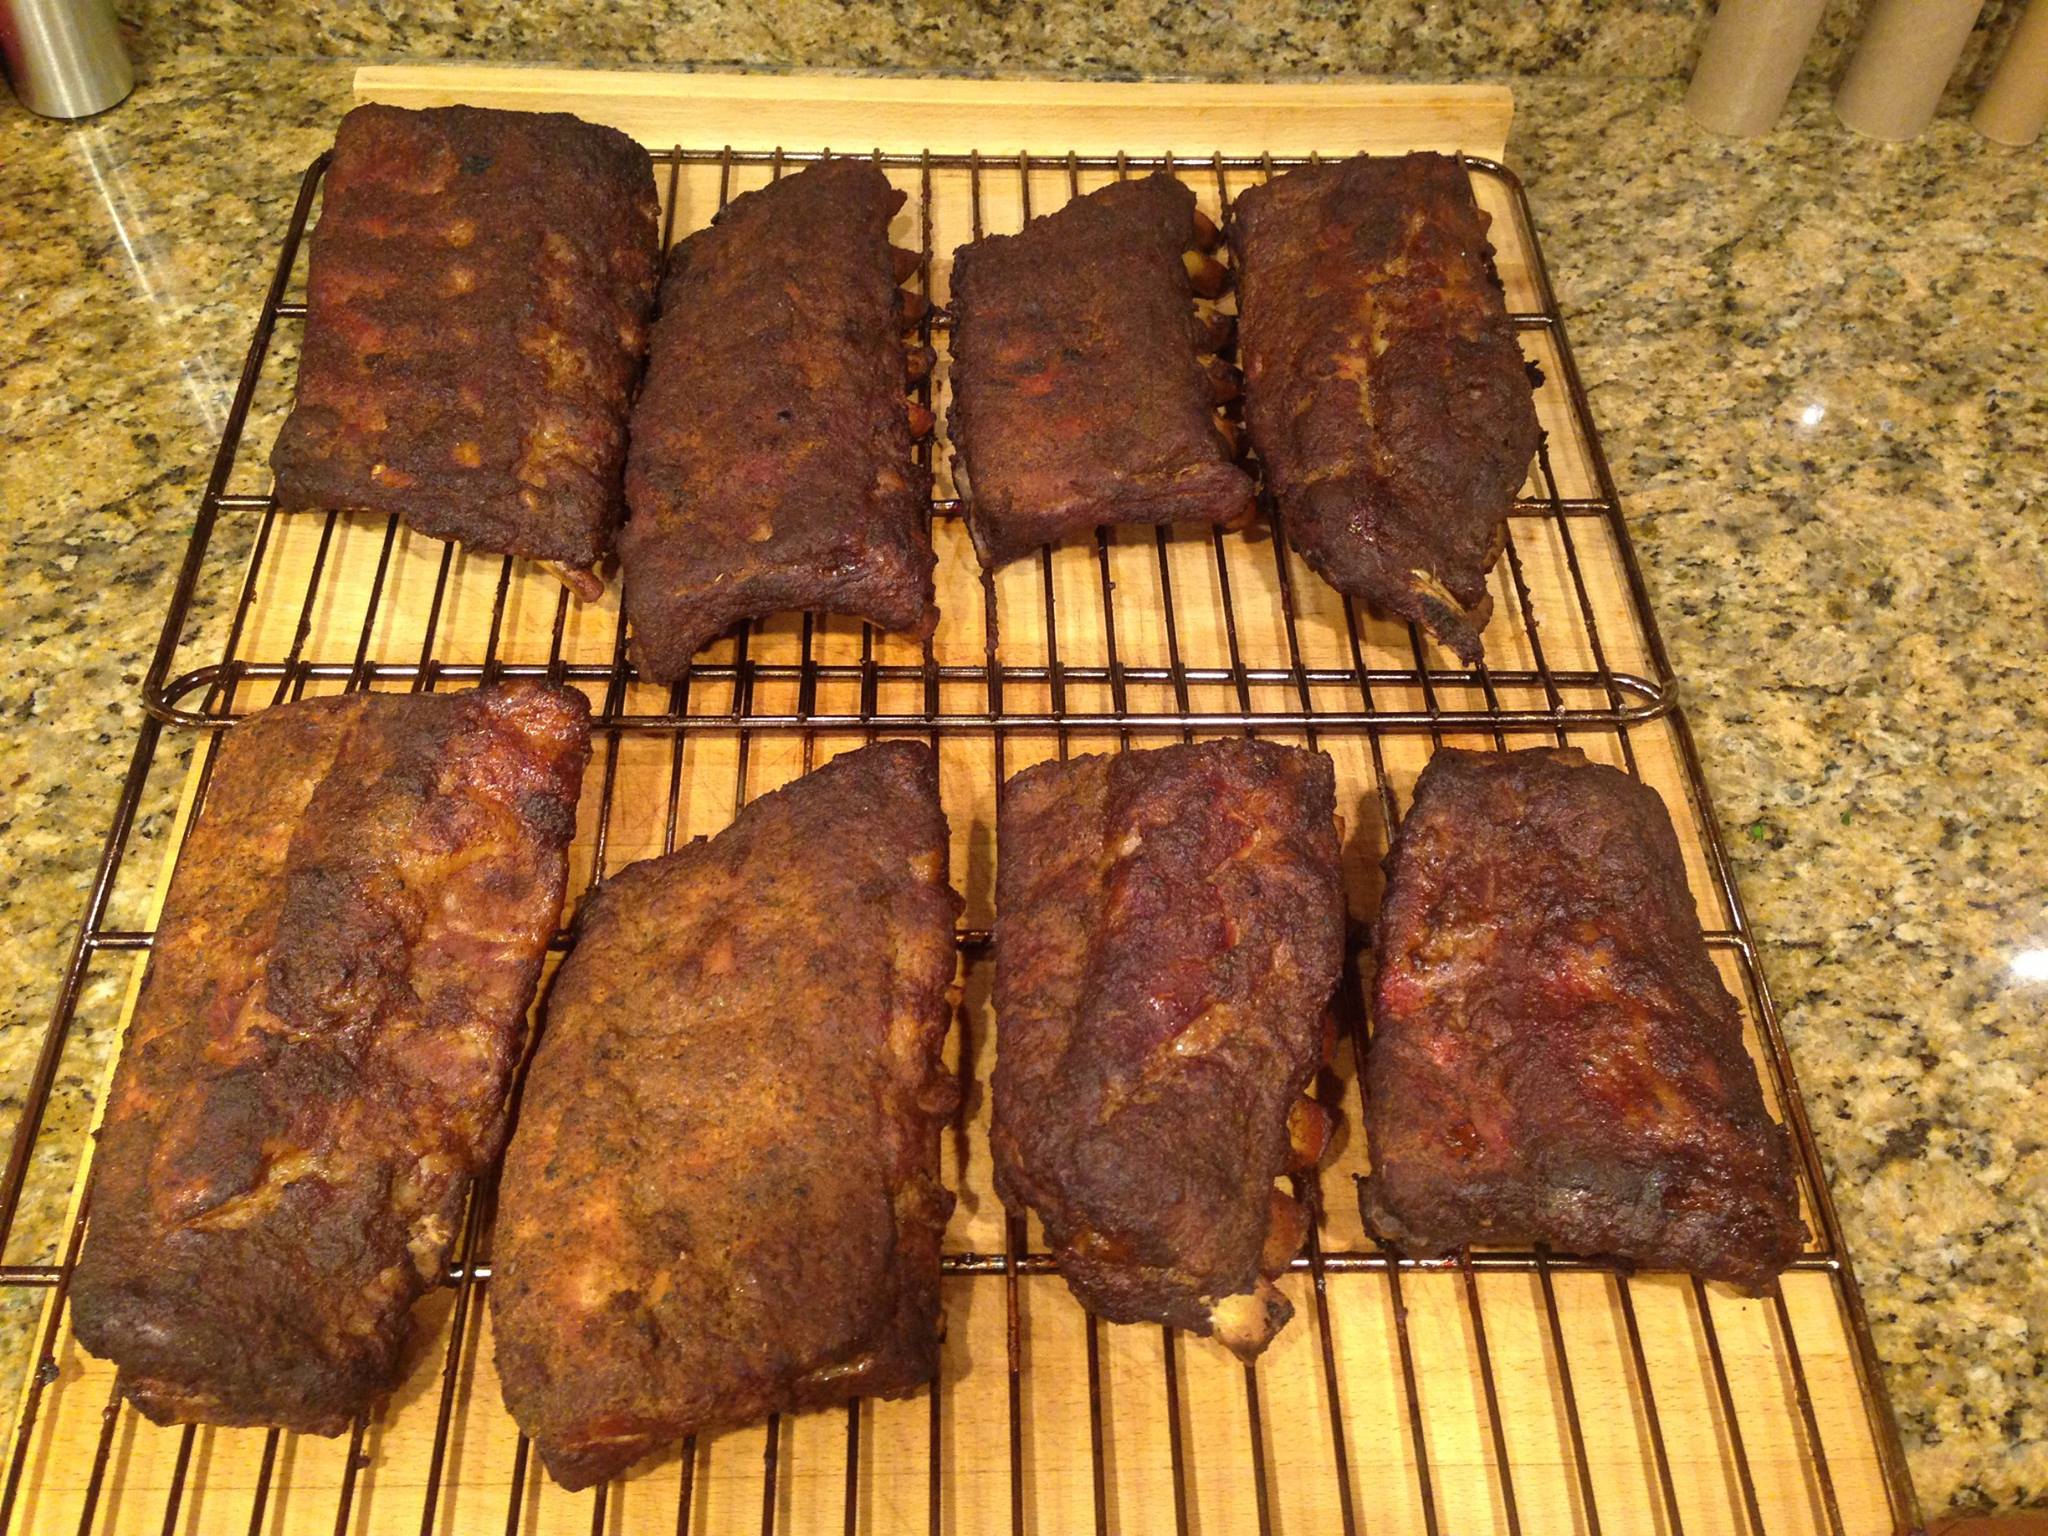 Yesterday’s low and slow smoked pork baby back ribs…